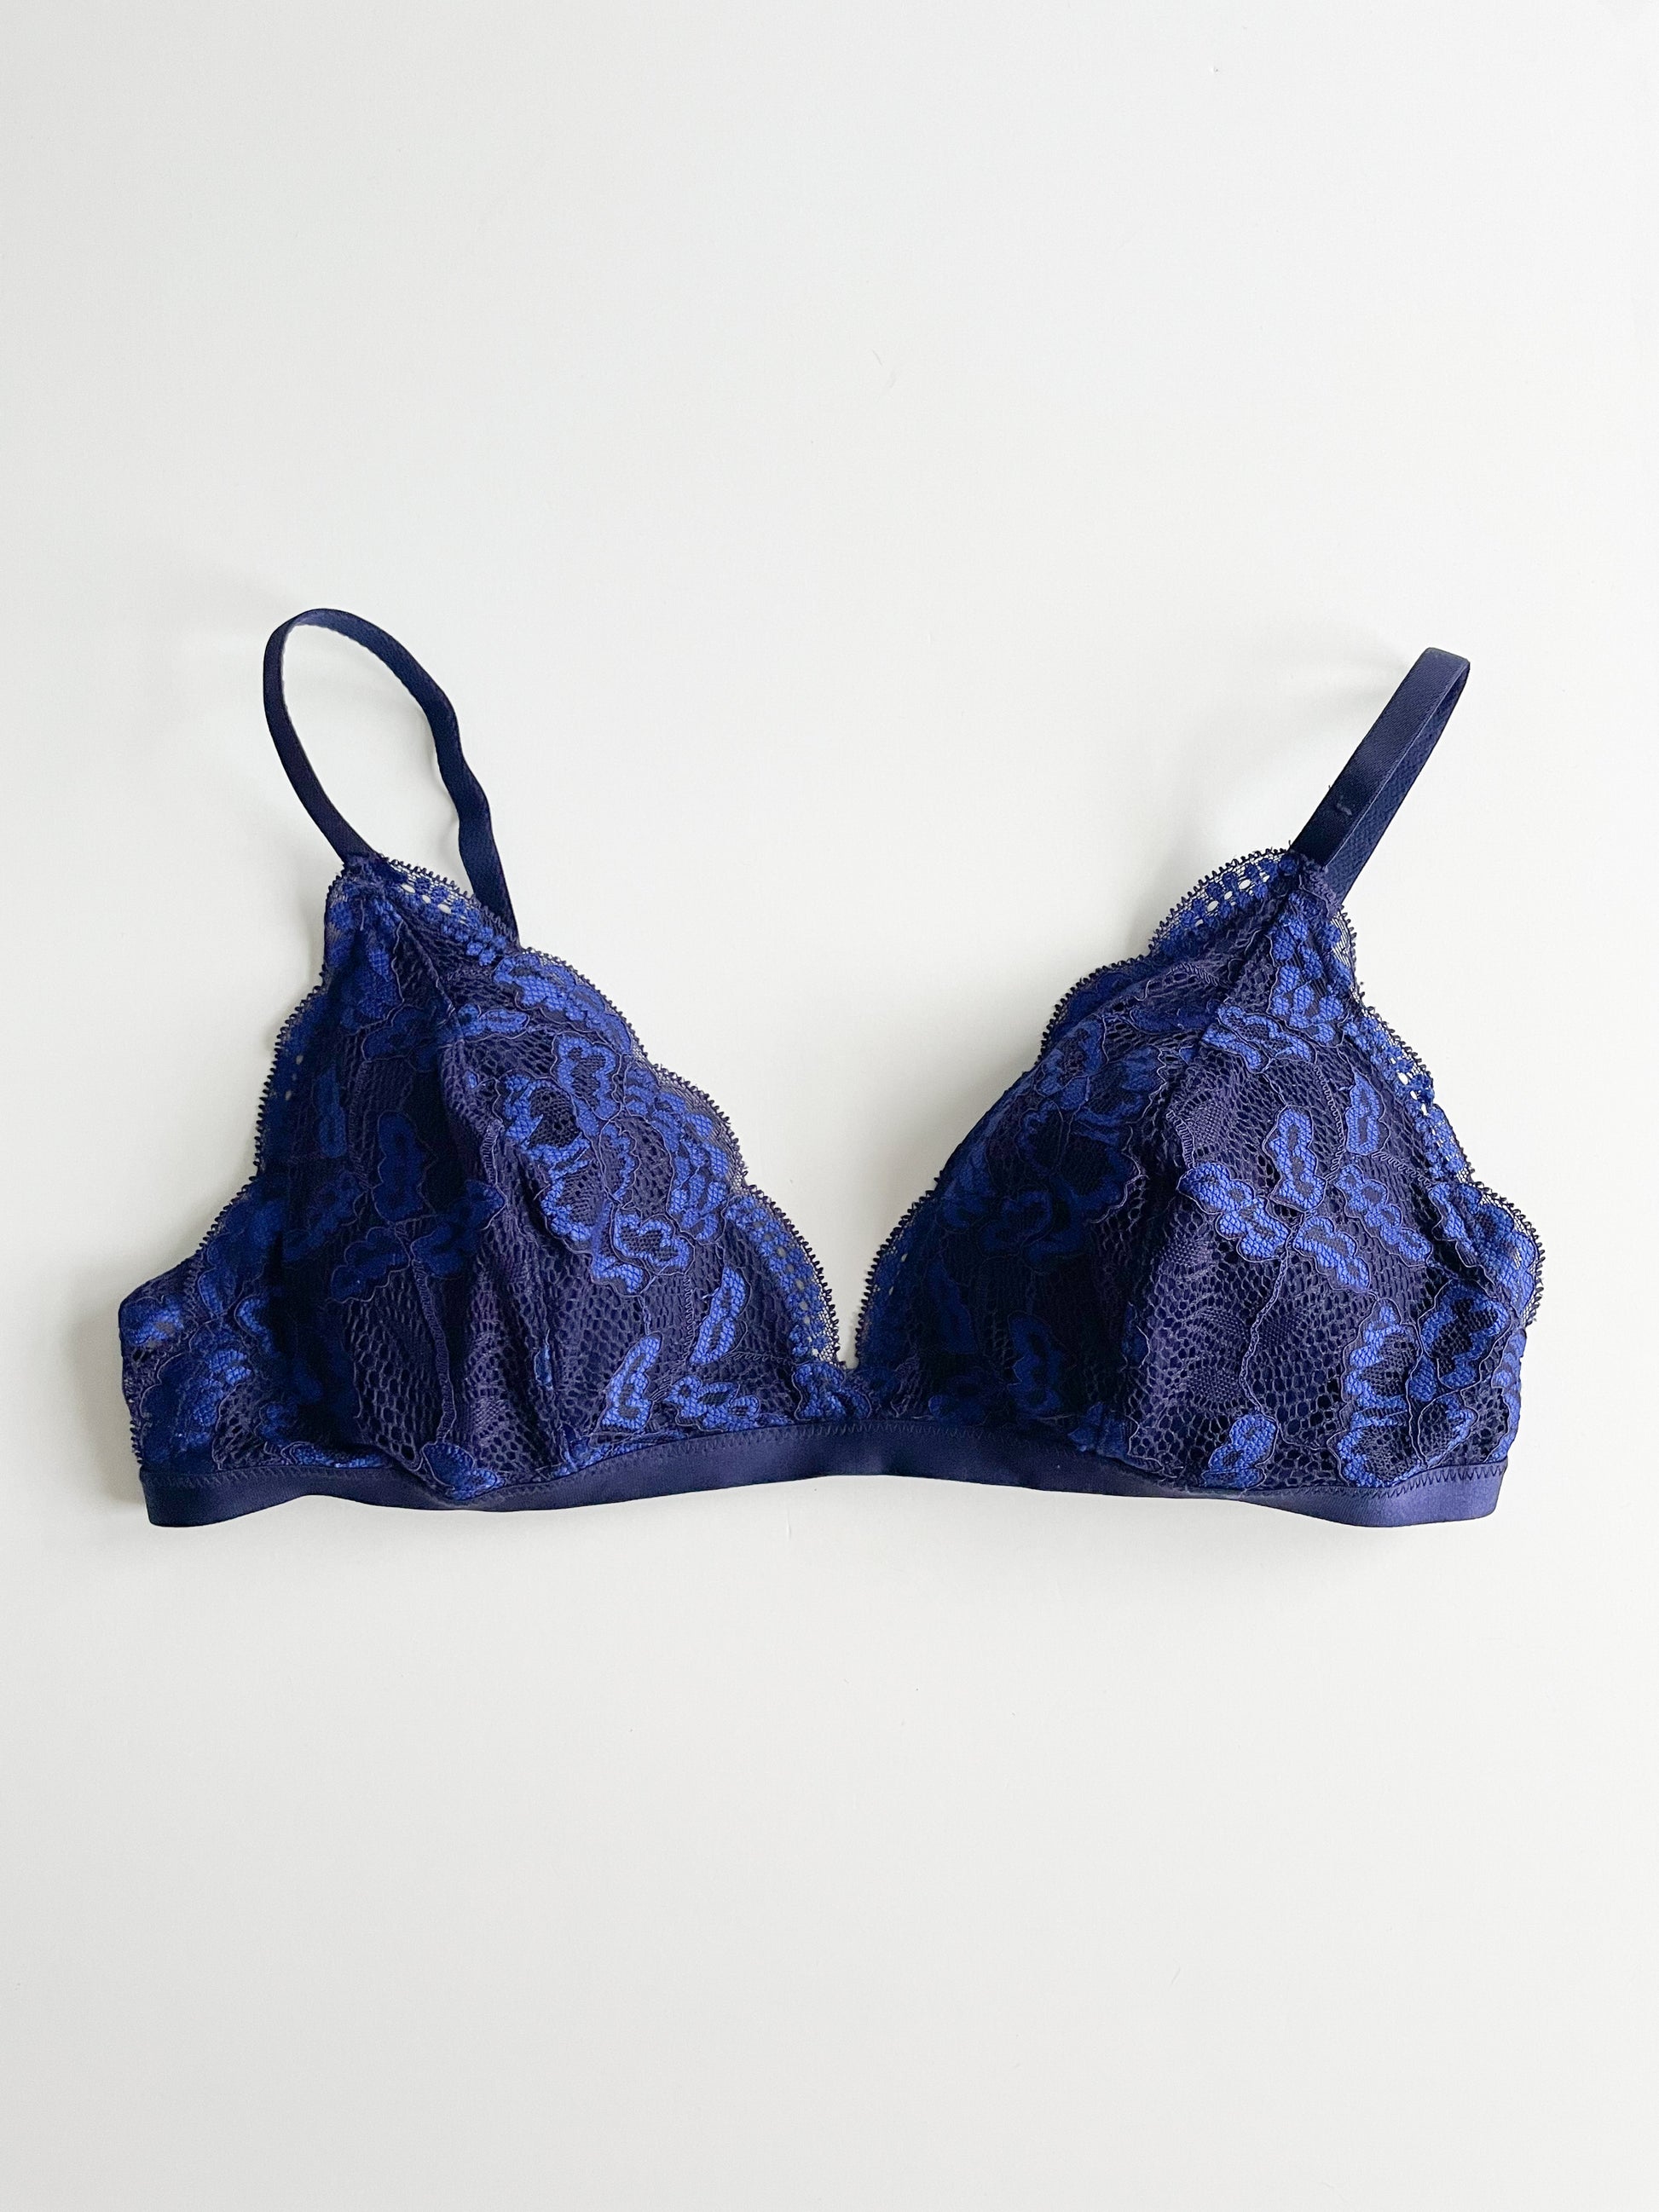 Boutine La lace bra new!!, This bra is so cute but